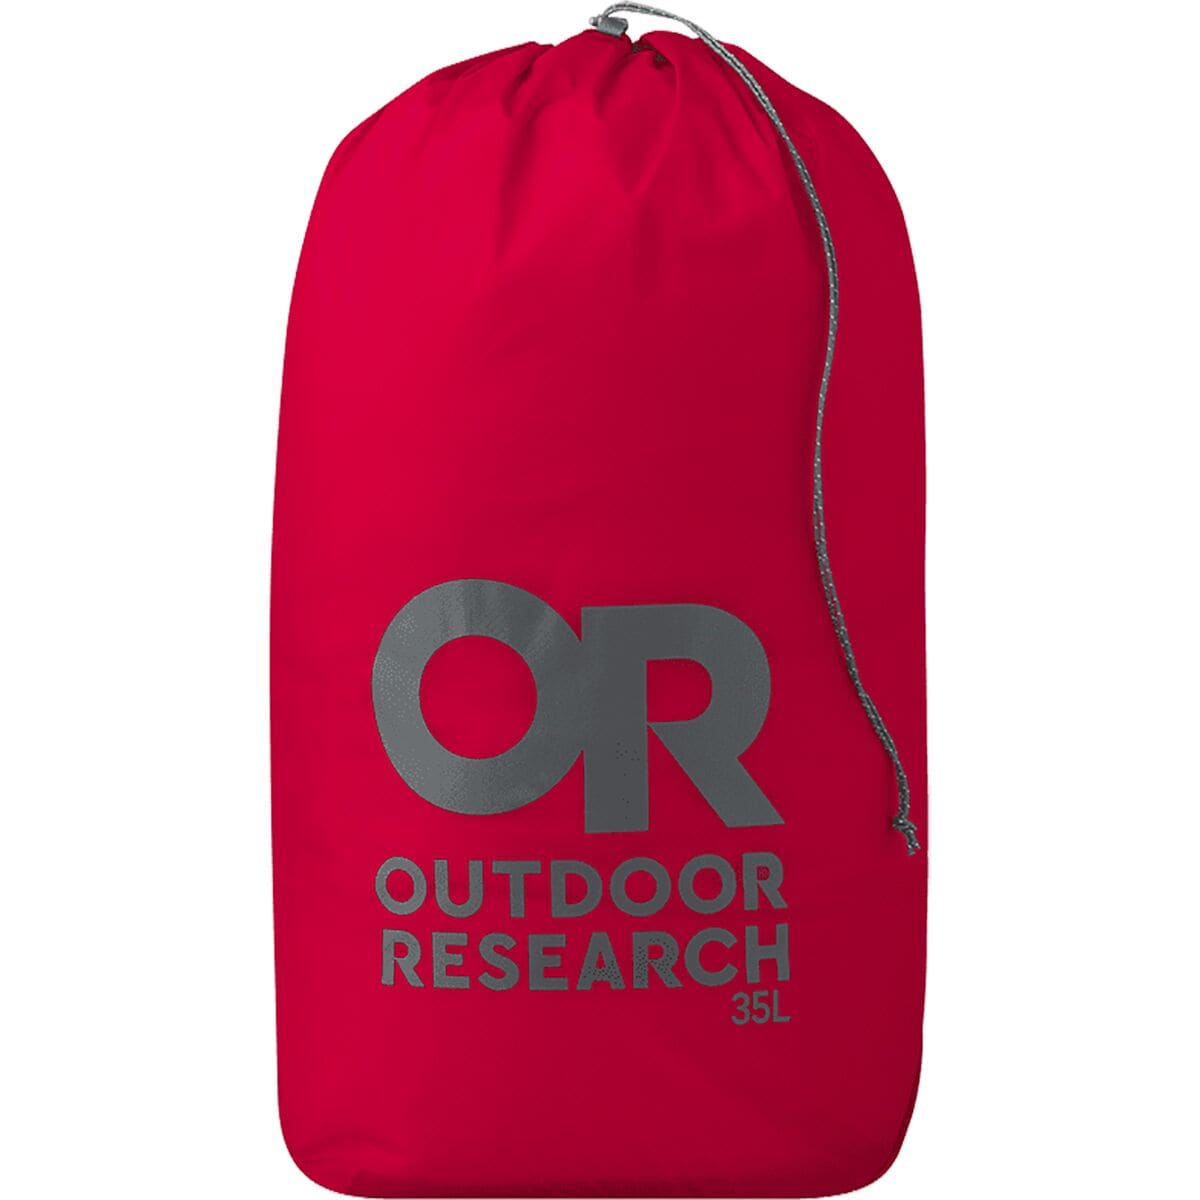 Outdoor Research PackOut Ultralight 35L Stuff Sack